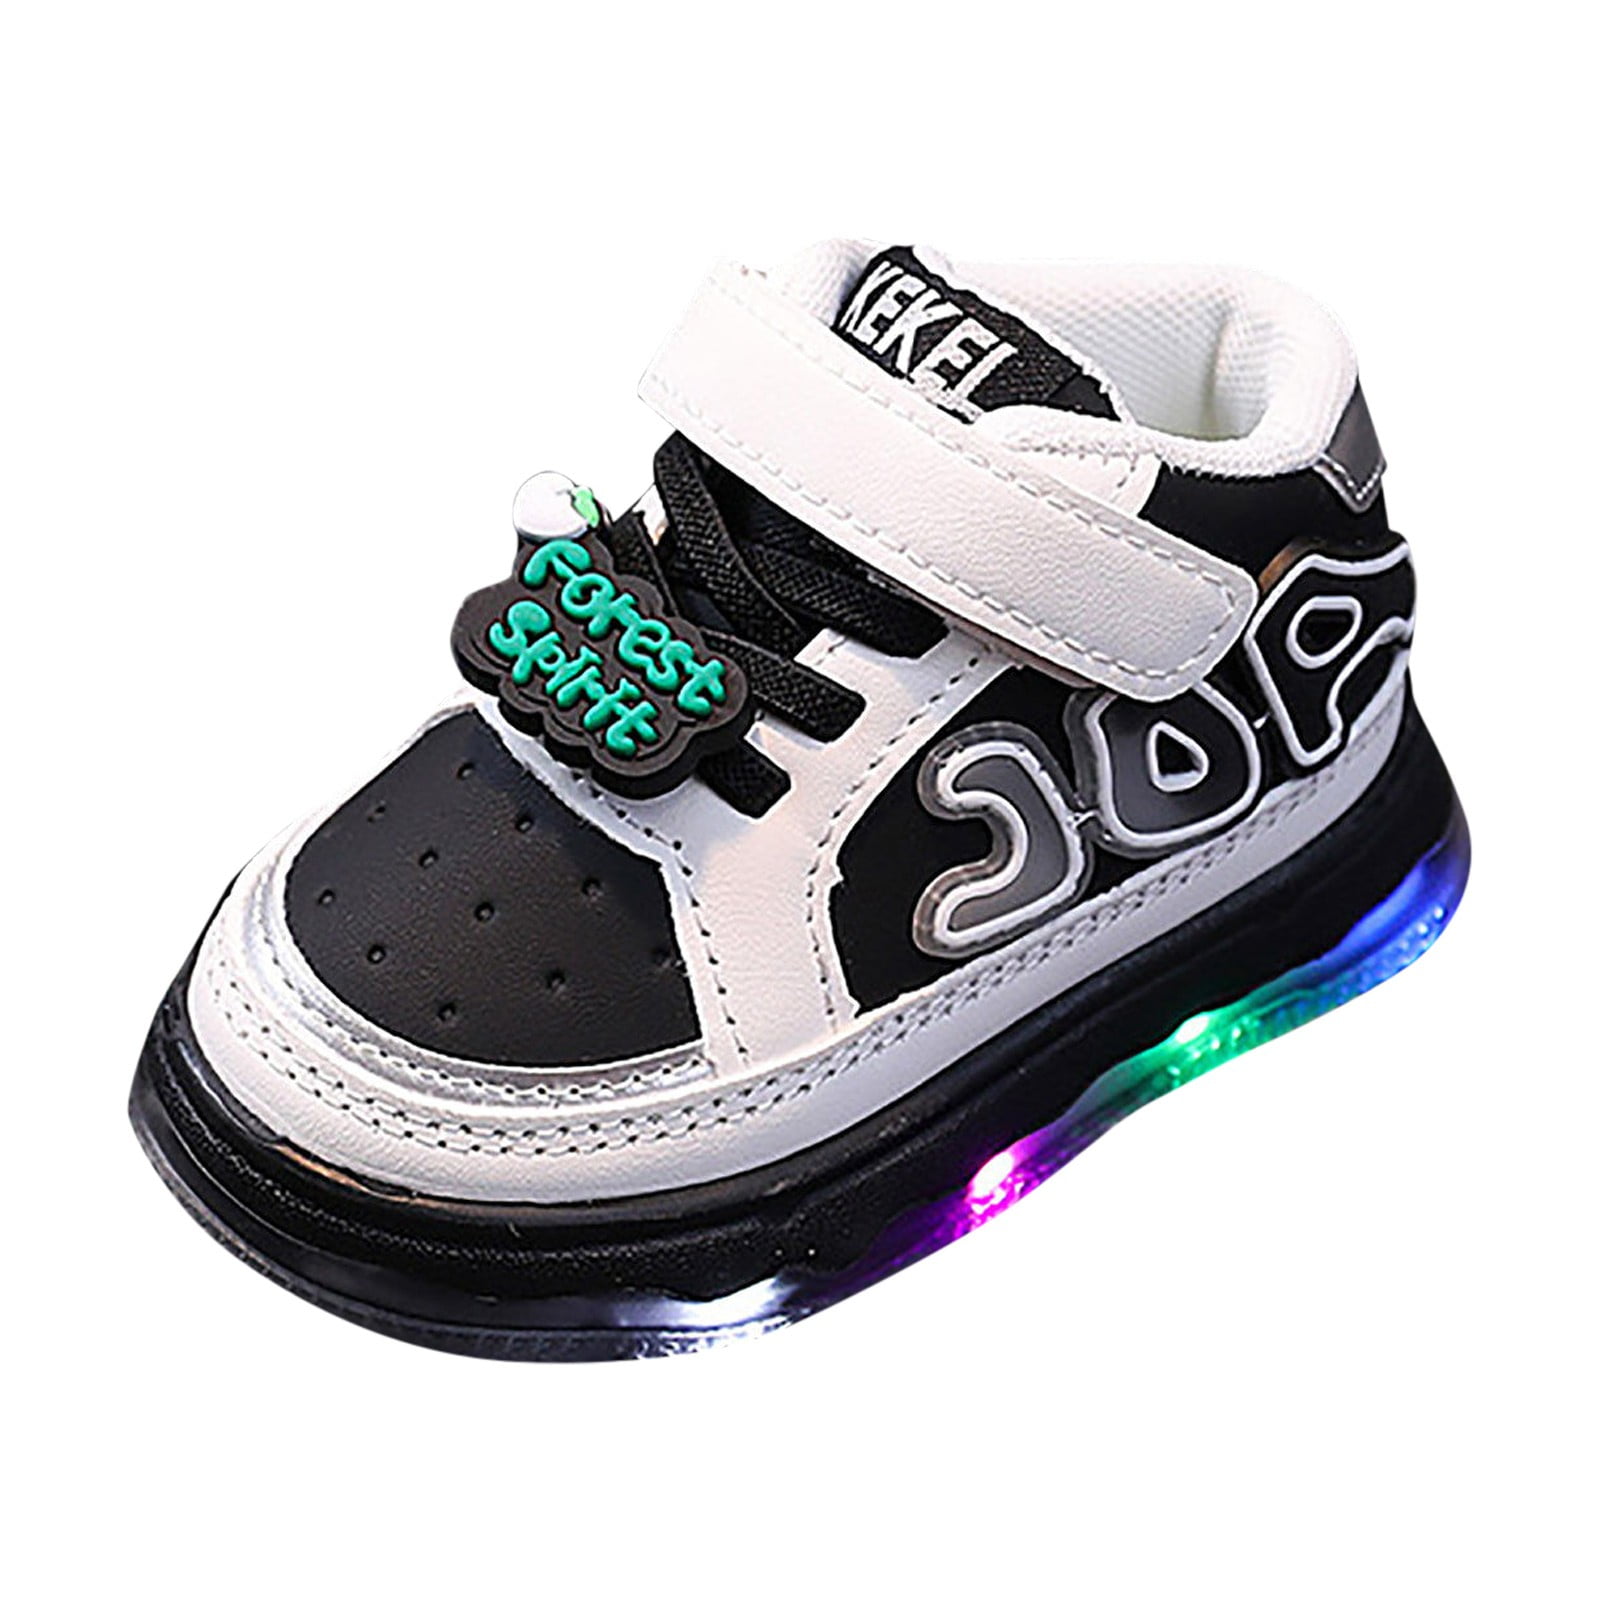 Children Shoes Sports Shoes Light Shoes Small White Shoes Light Board ...